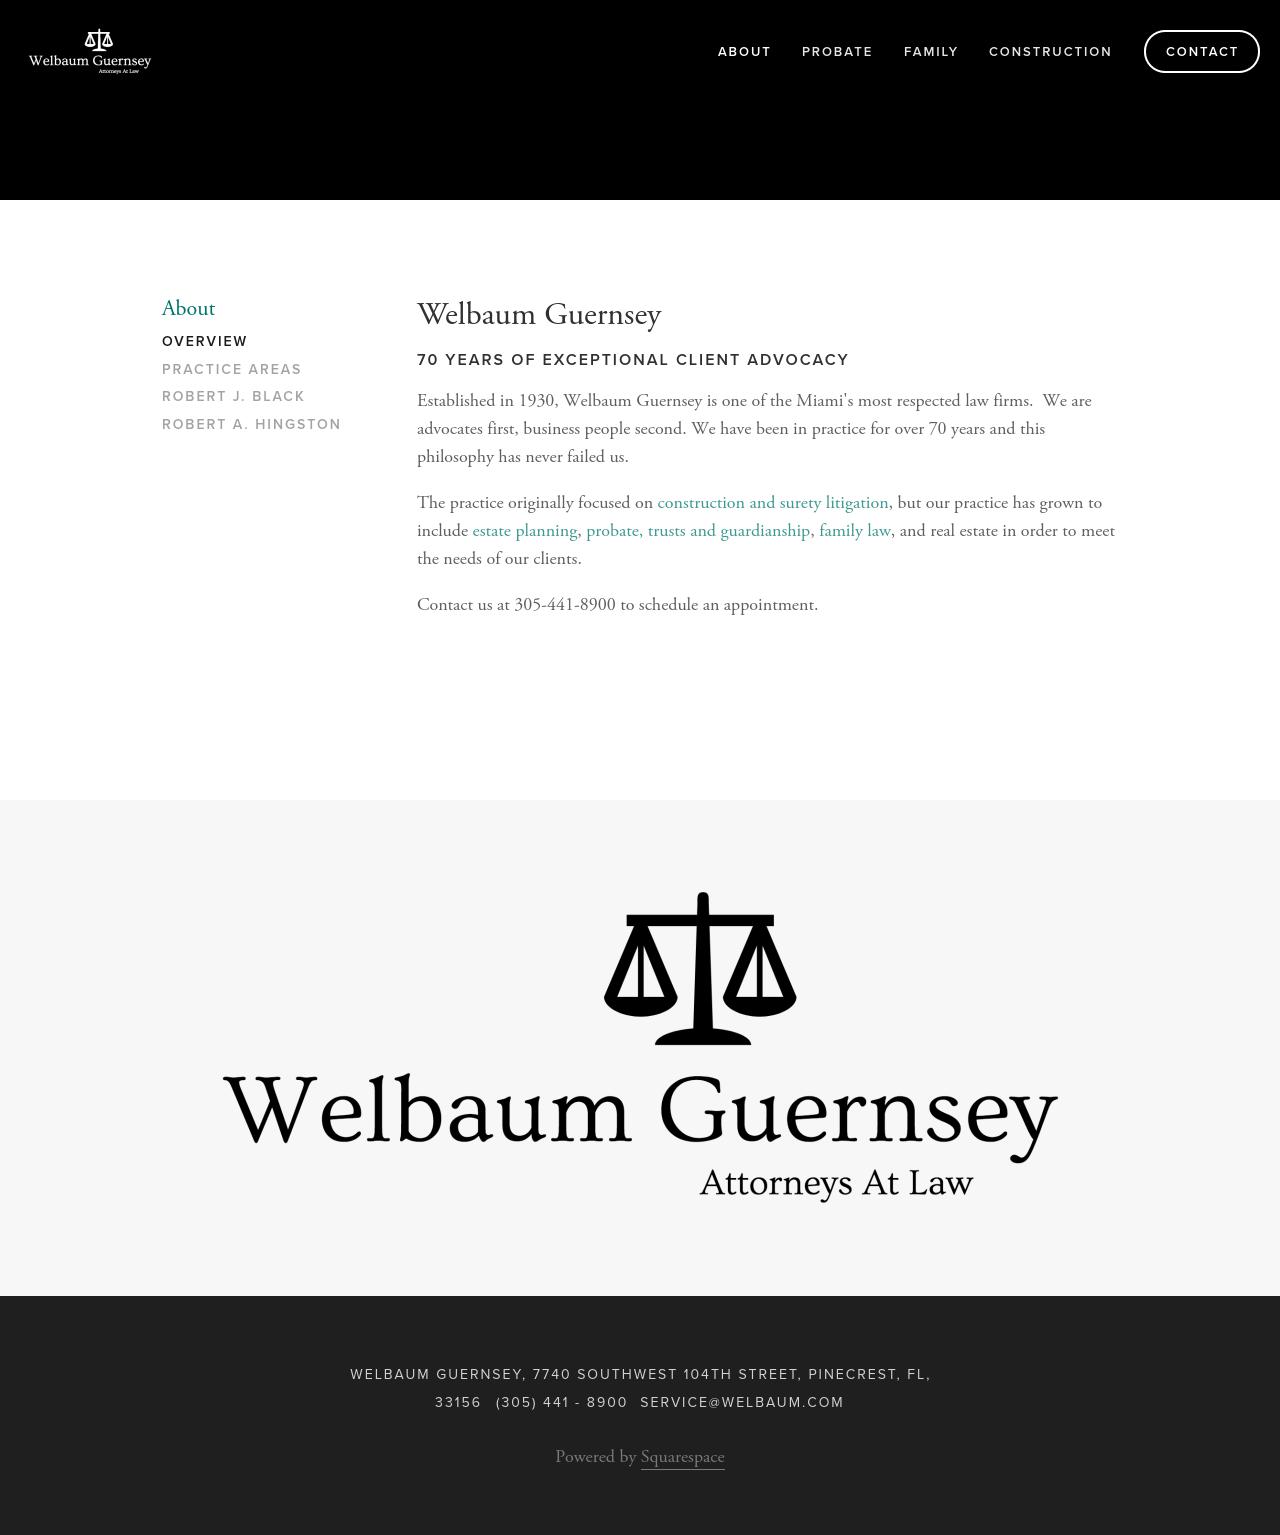 Welbaum Guernsey - Coral Gables FL Lawyers